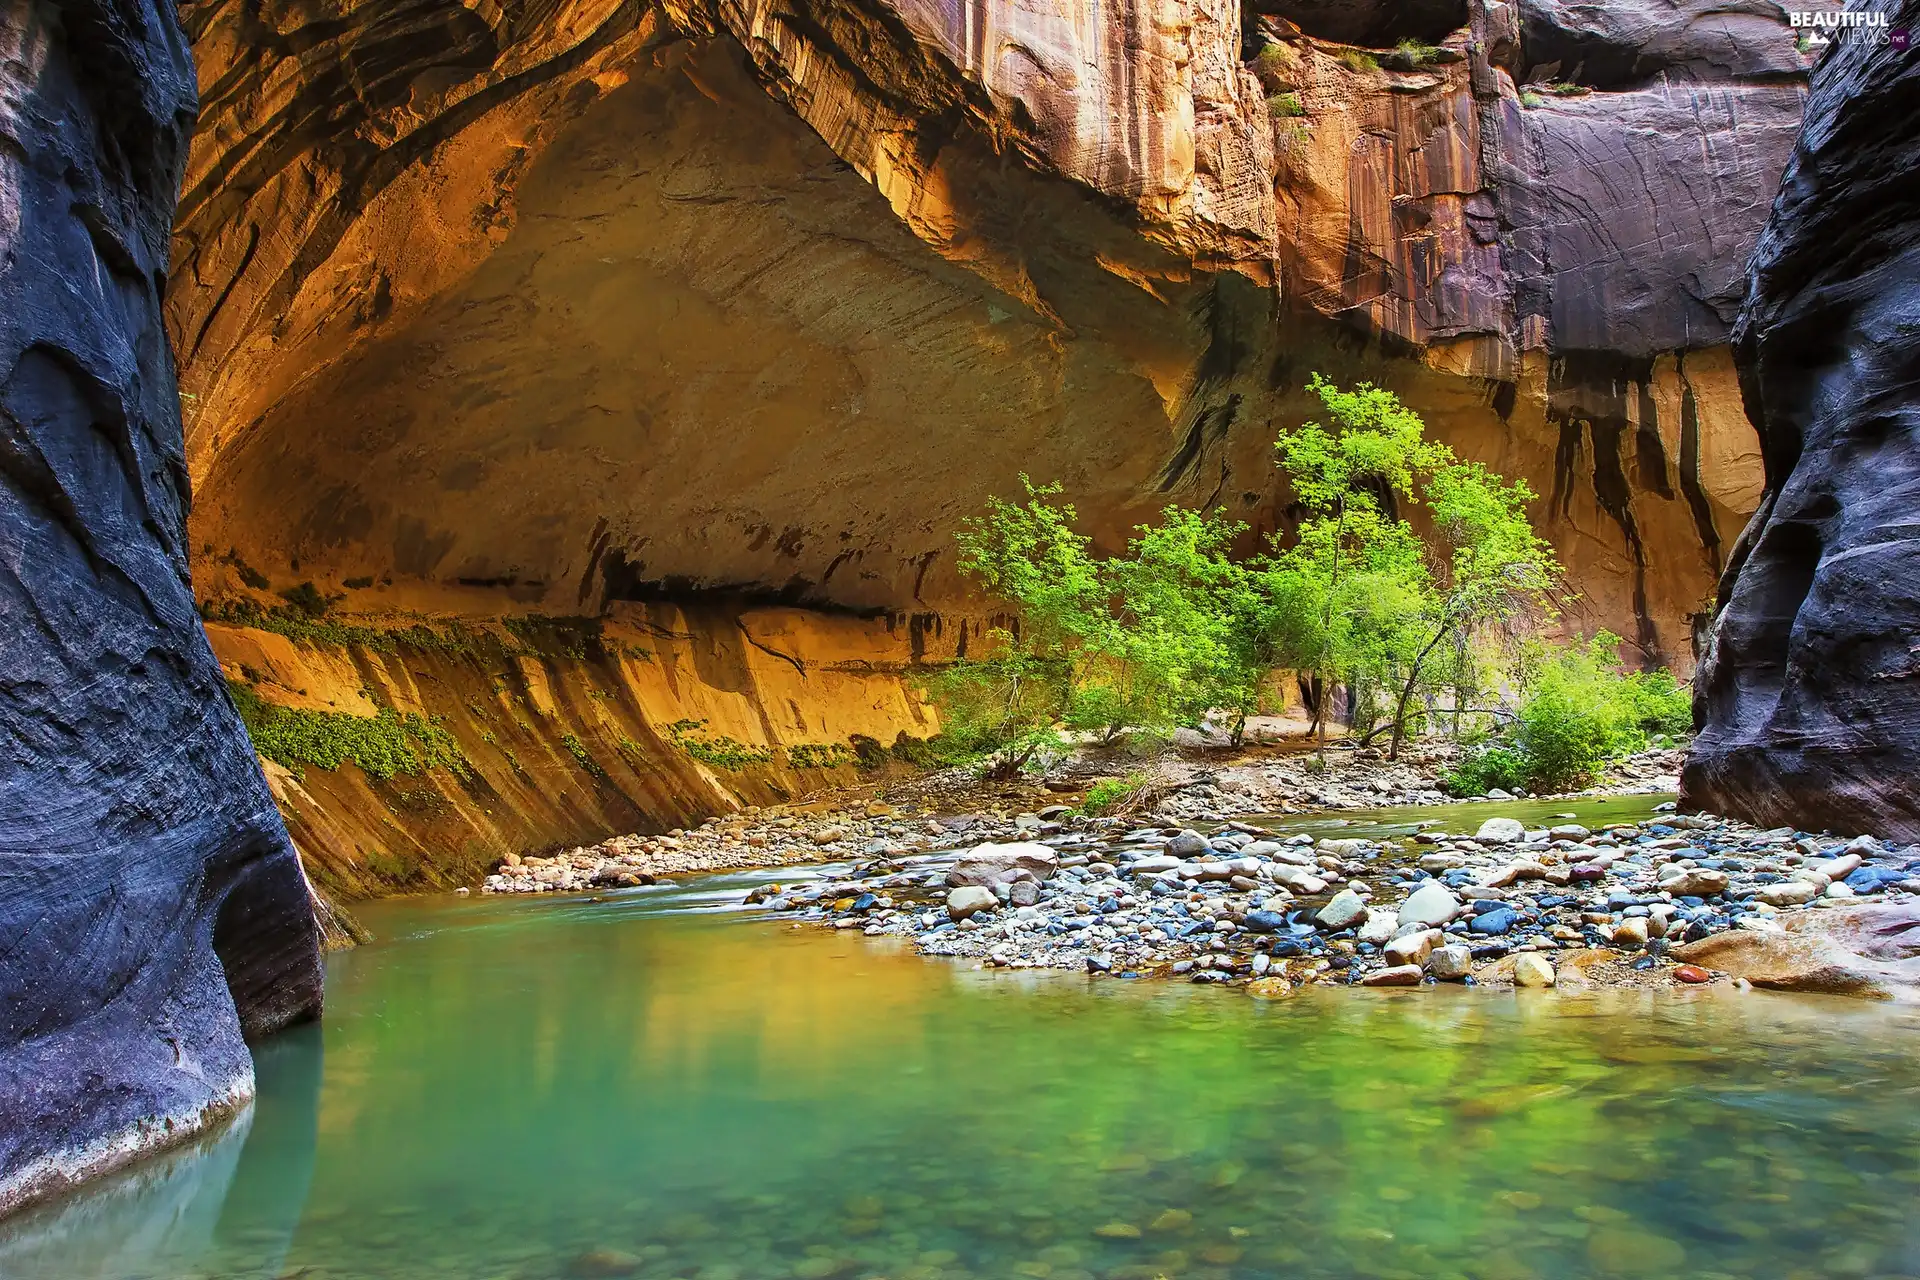 Zion Narrows Canyon, rocks, The United States, Stones, Utah State, Virgin River, Zion National Park, VEGETATION